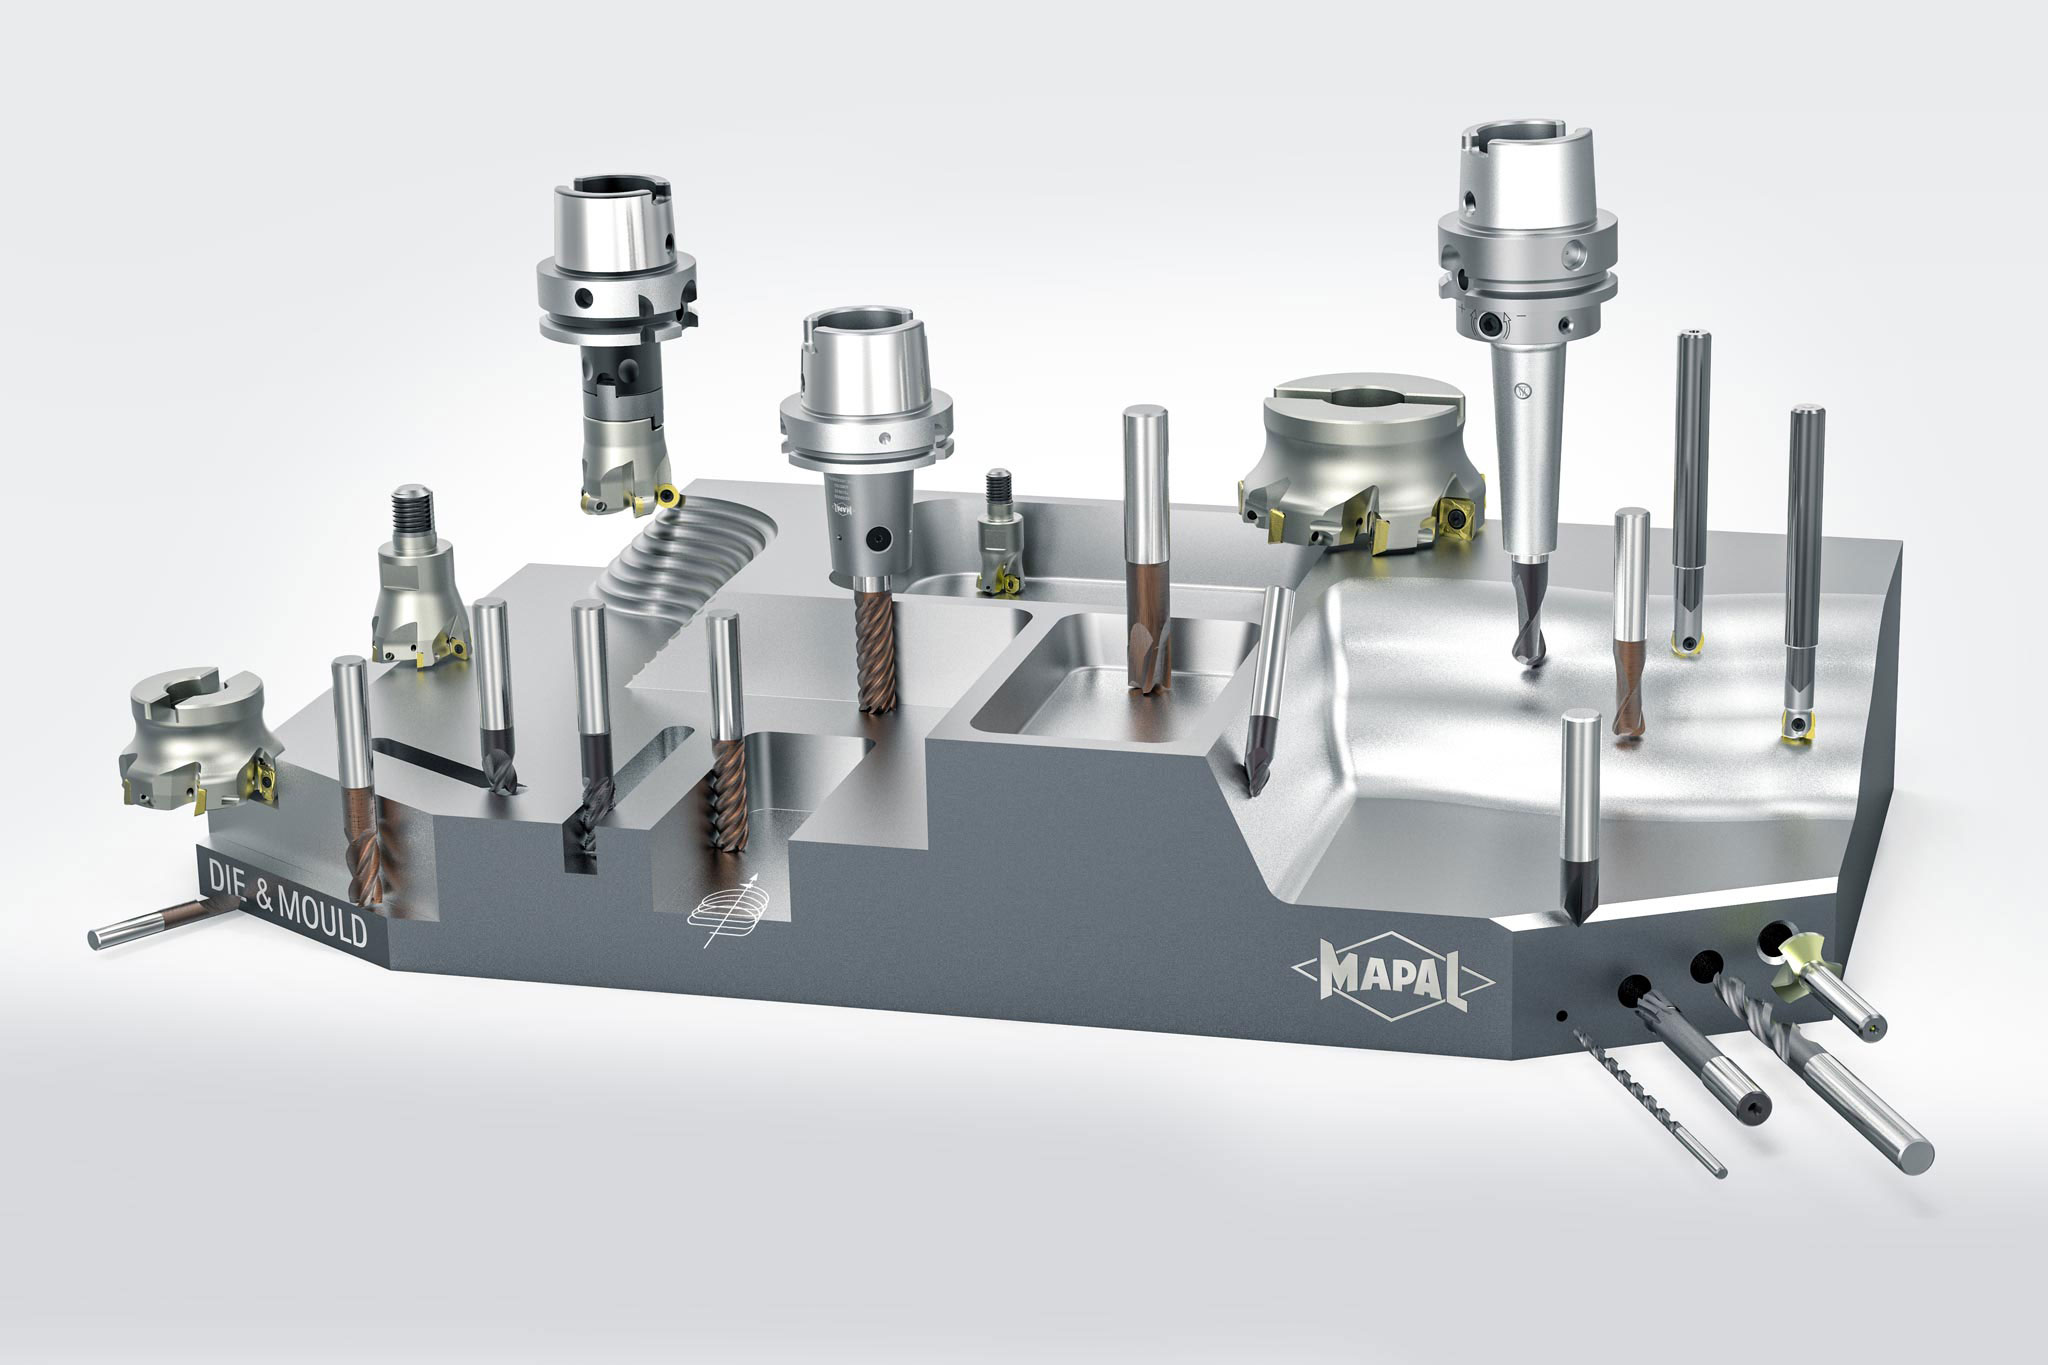 Almost two dozen tools for die & mould sector are placed on a sample component.